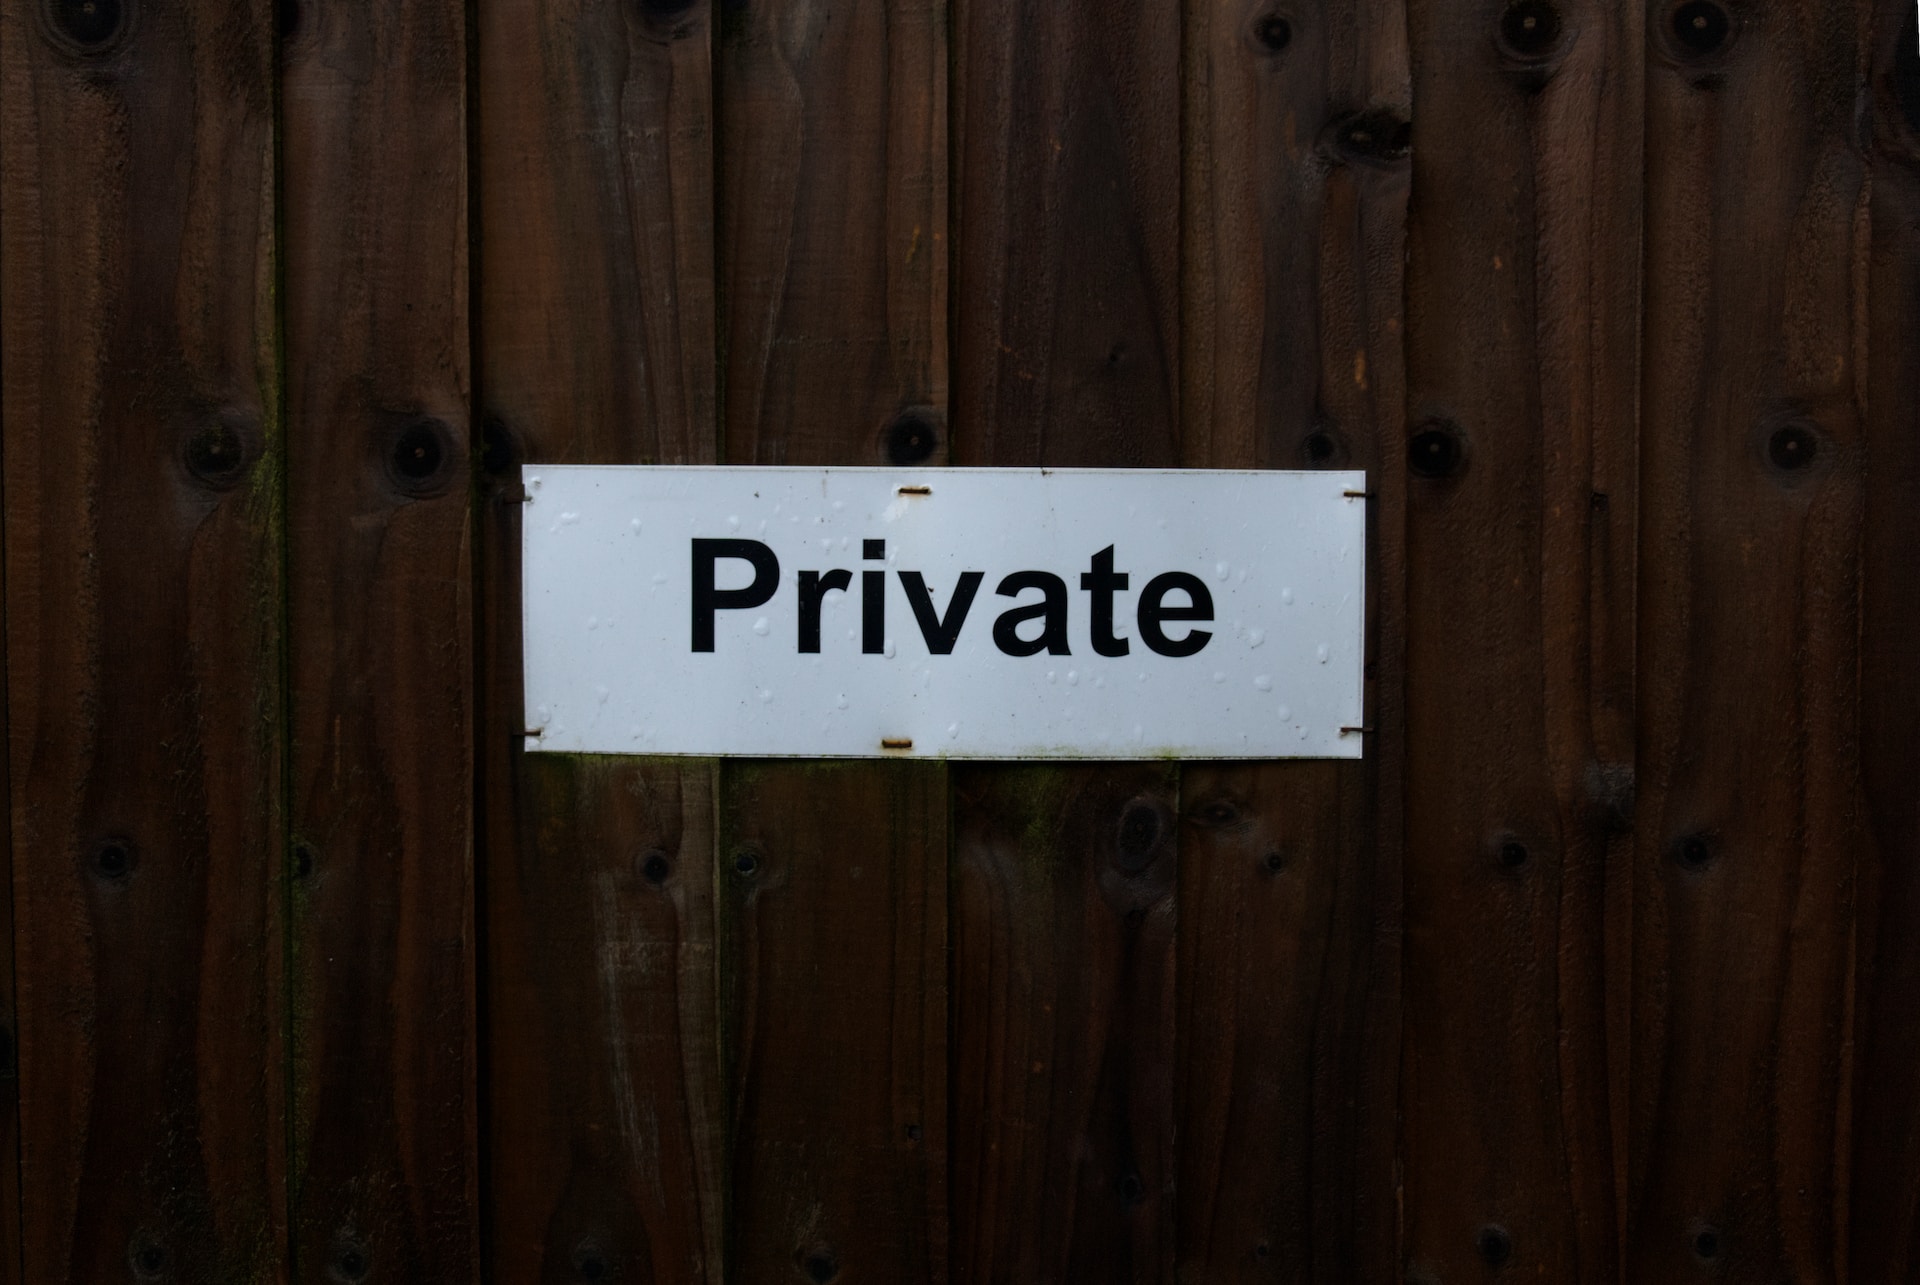 Sign "Private" on a wooden background